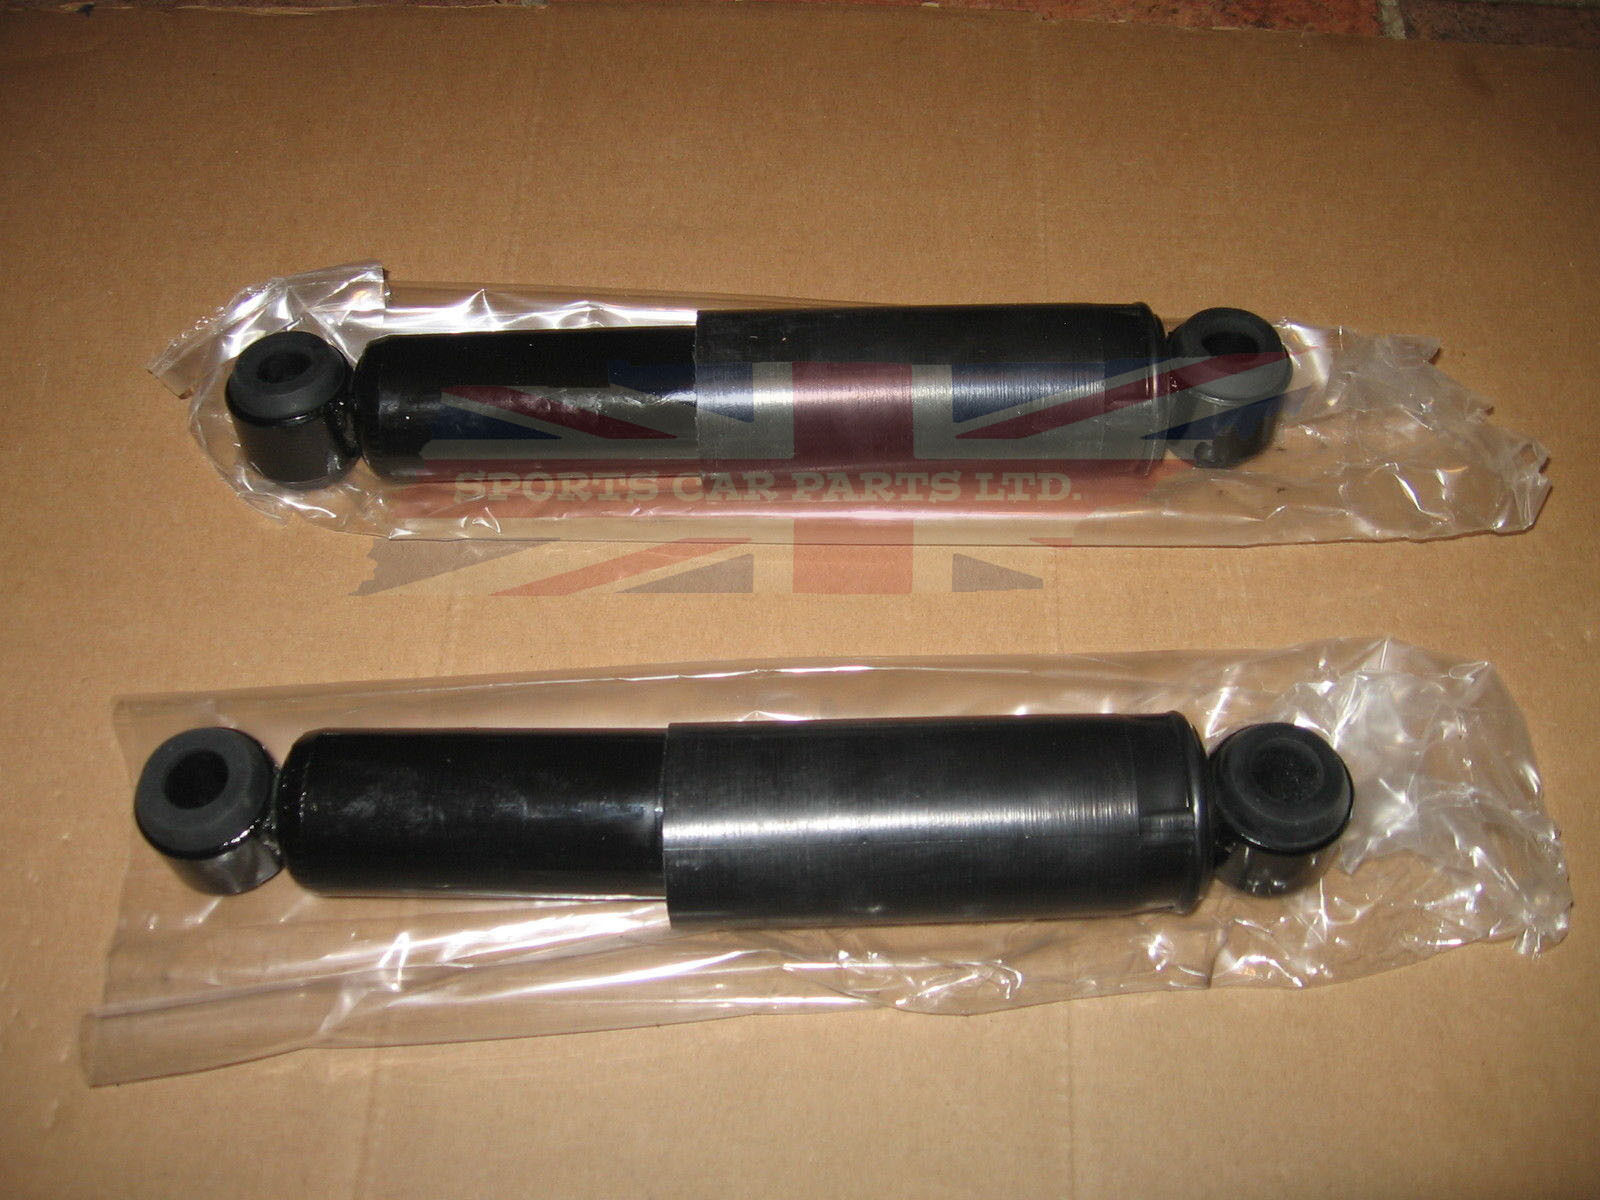 New Pair of Rear Shock Absorbers Shocks  for Triumph Spitfire 1963-1980